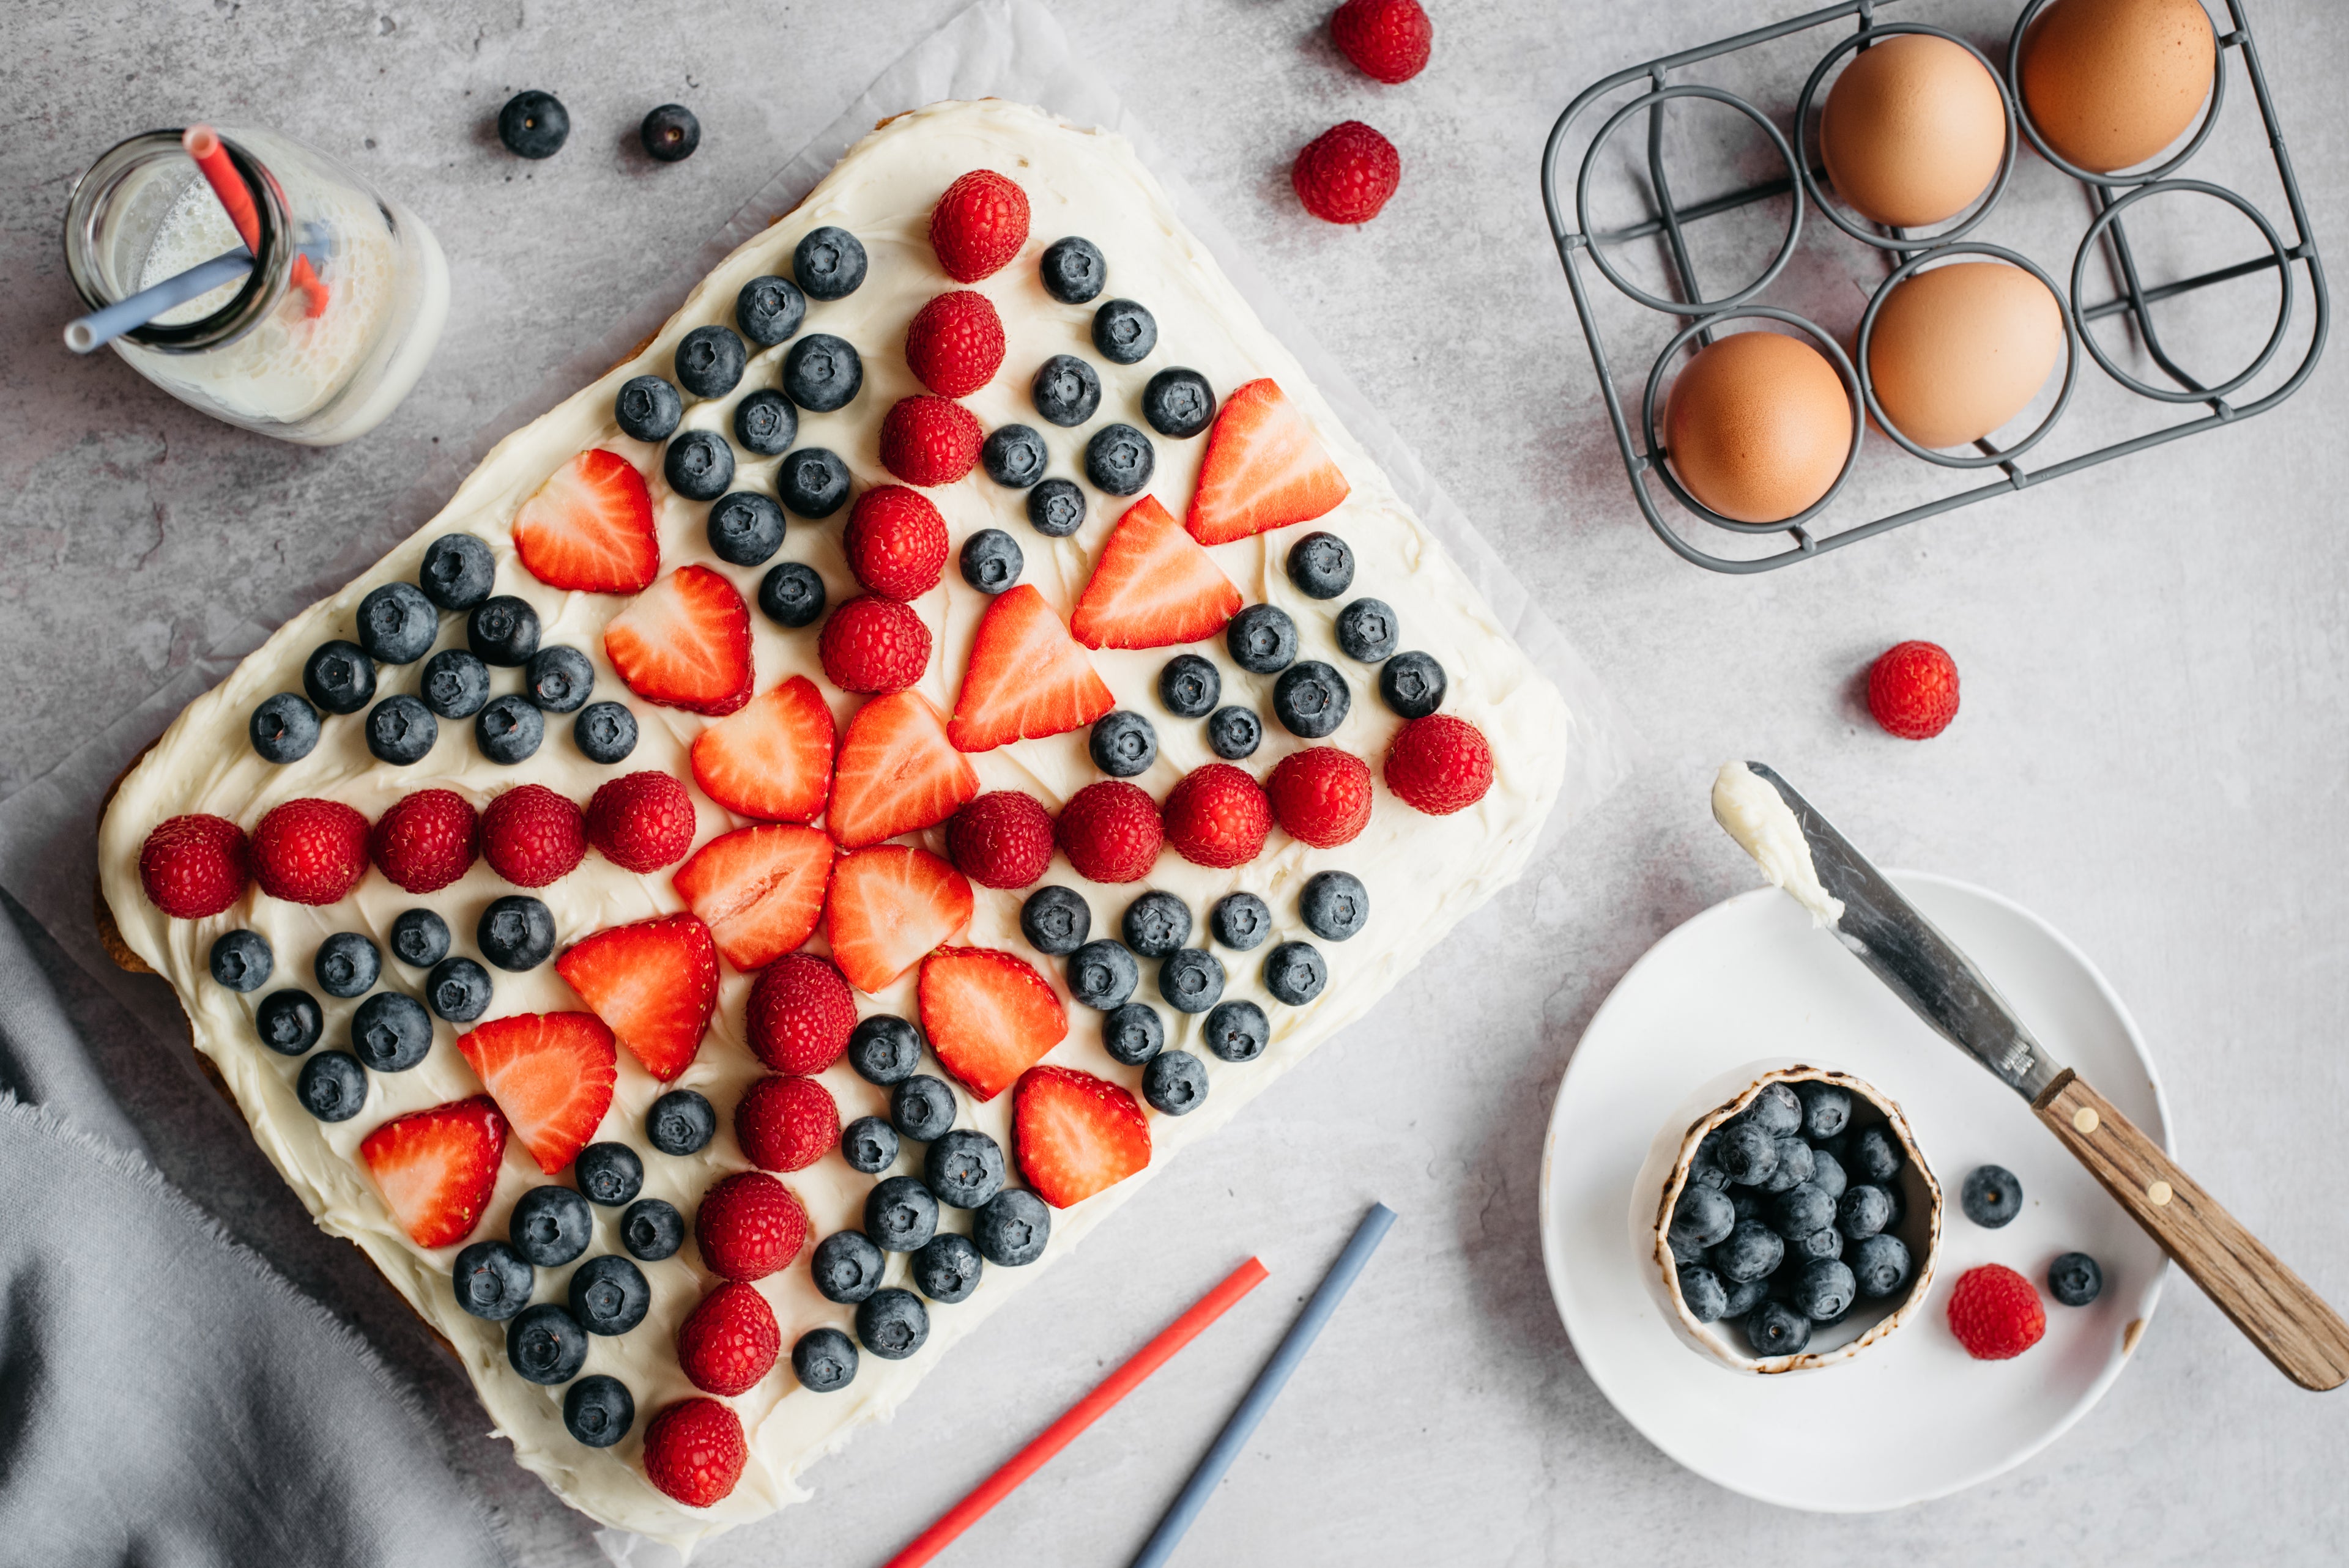 Top view of Union Jack Traybake decorated with seasonal fresh berries for the Jubilee, next to a bowl of blueberries and fresh eggs